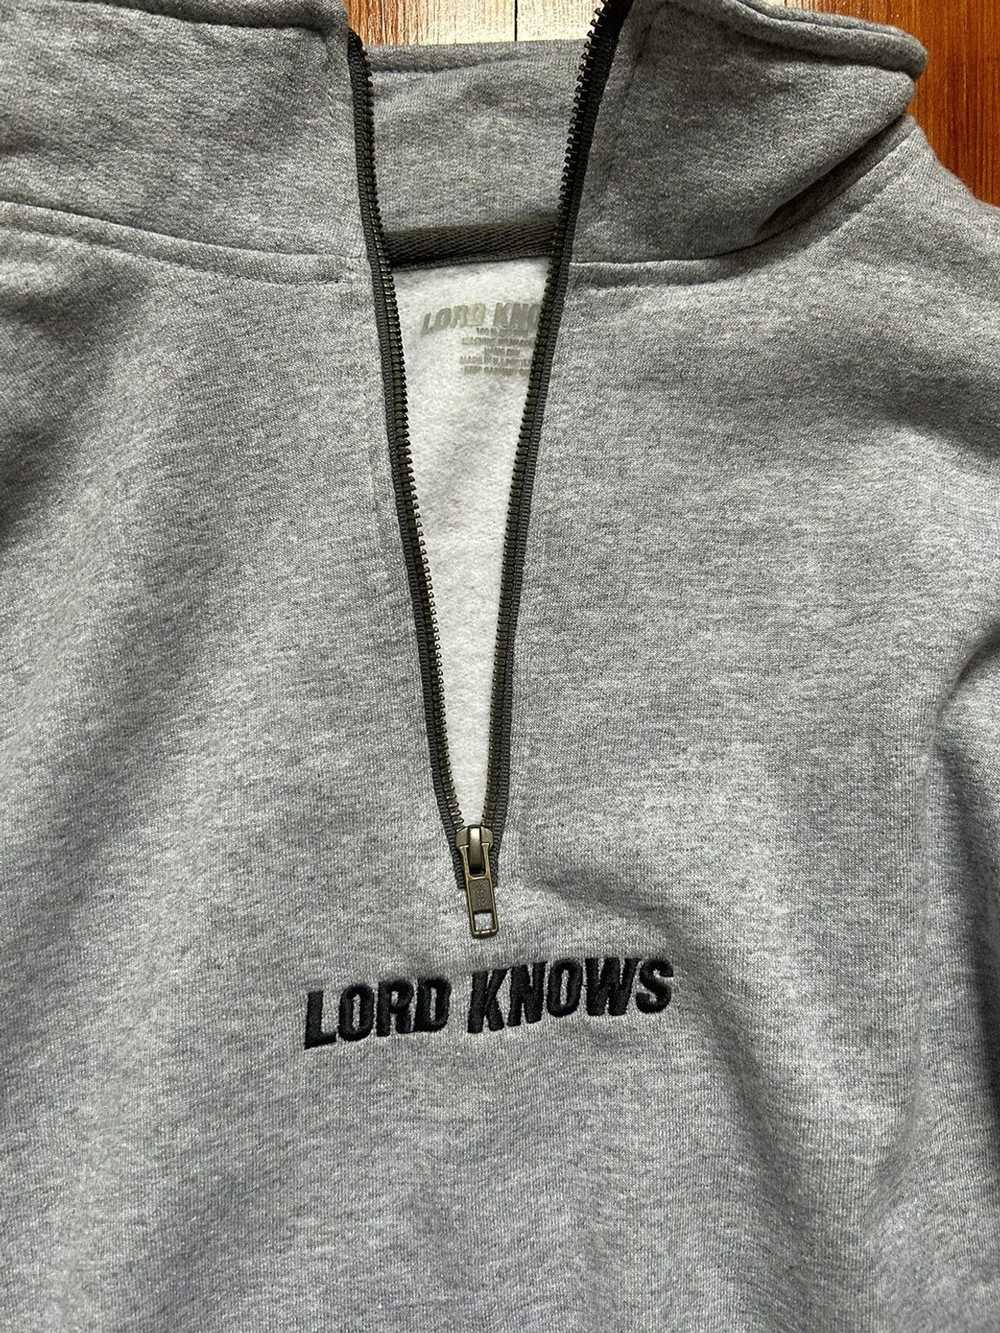 Lxrdknows Lord Knows Collared Zip up - image 4